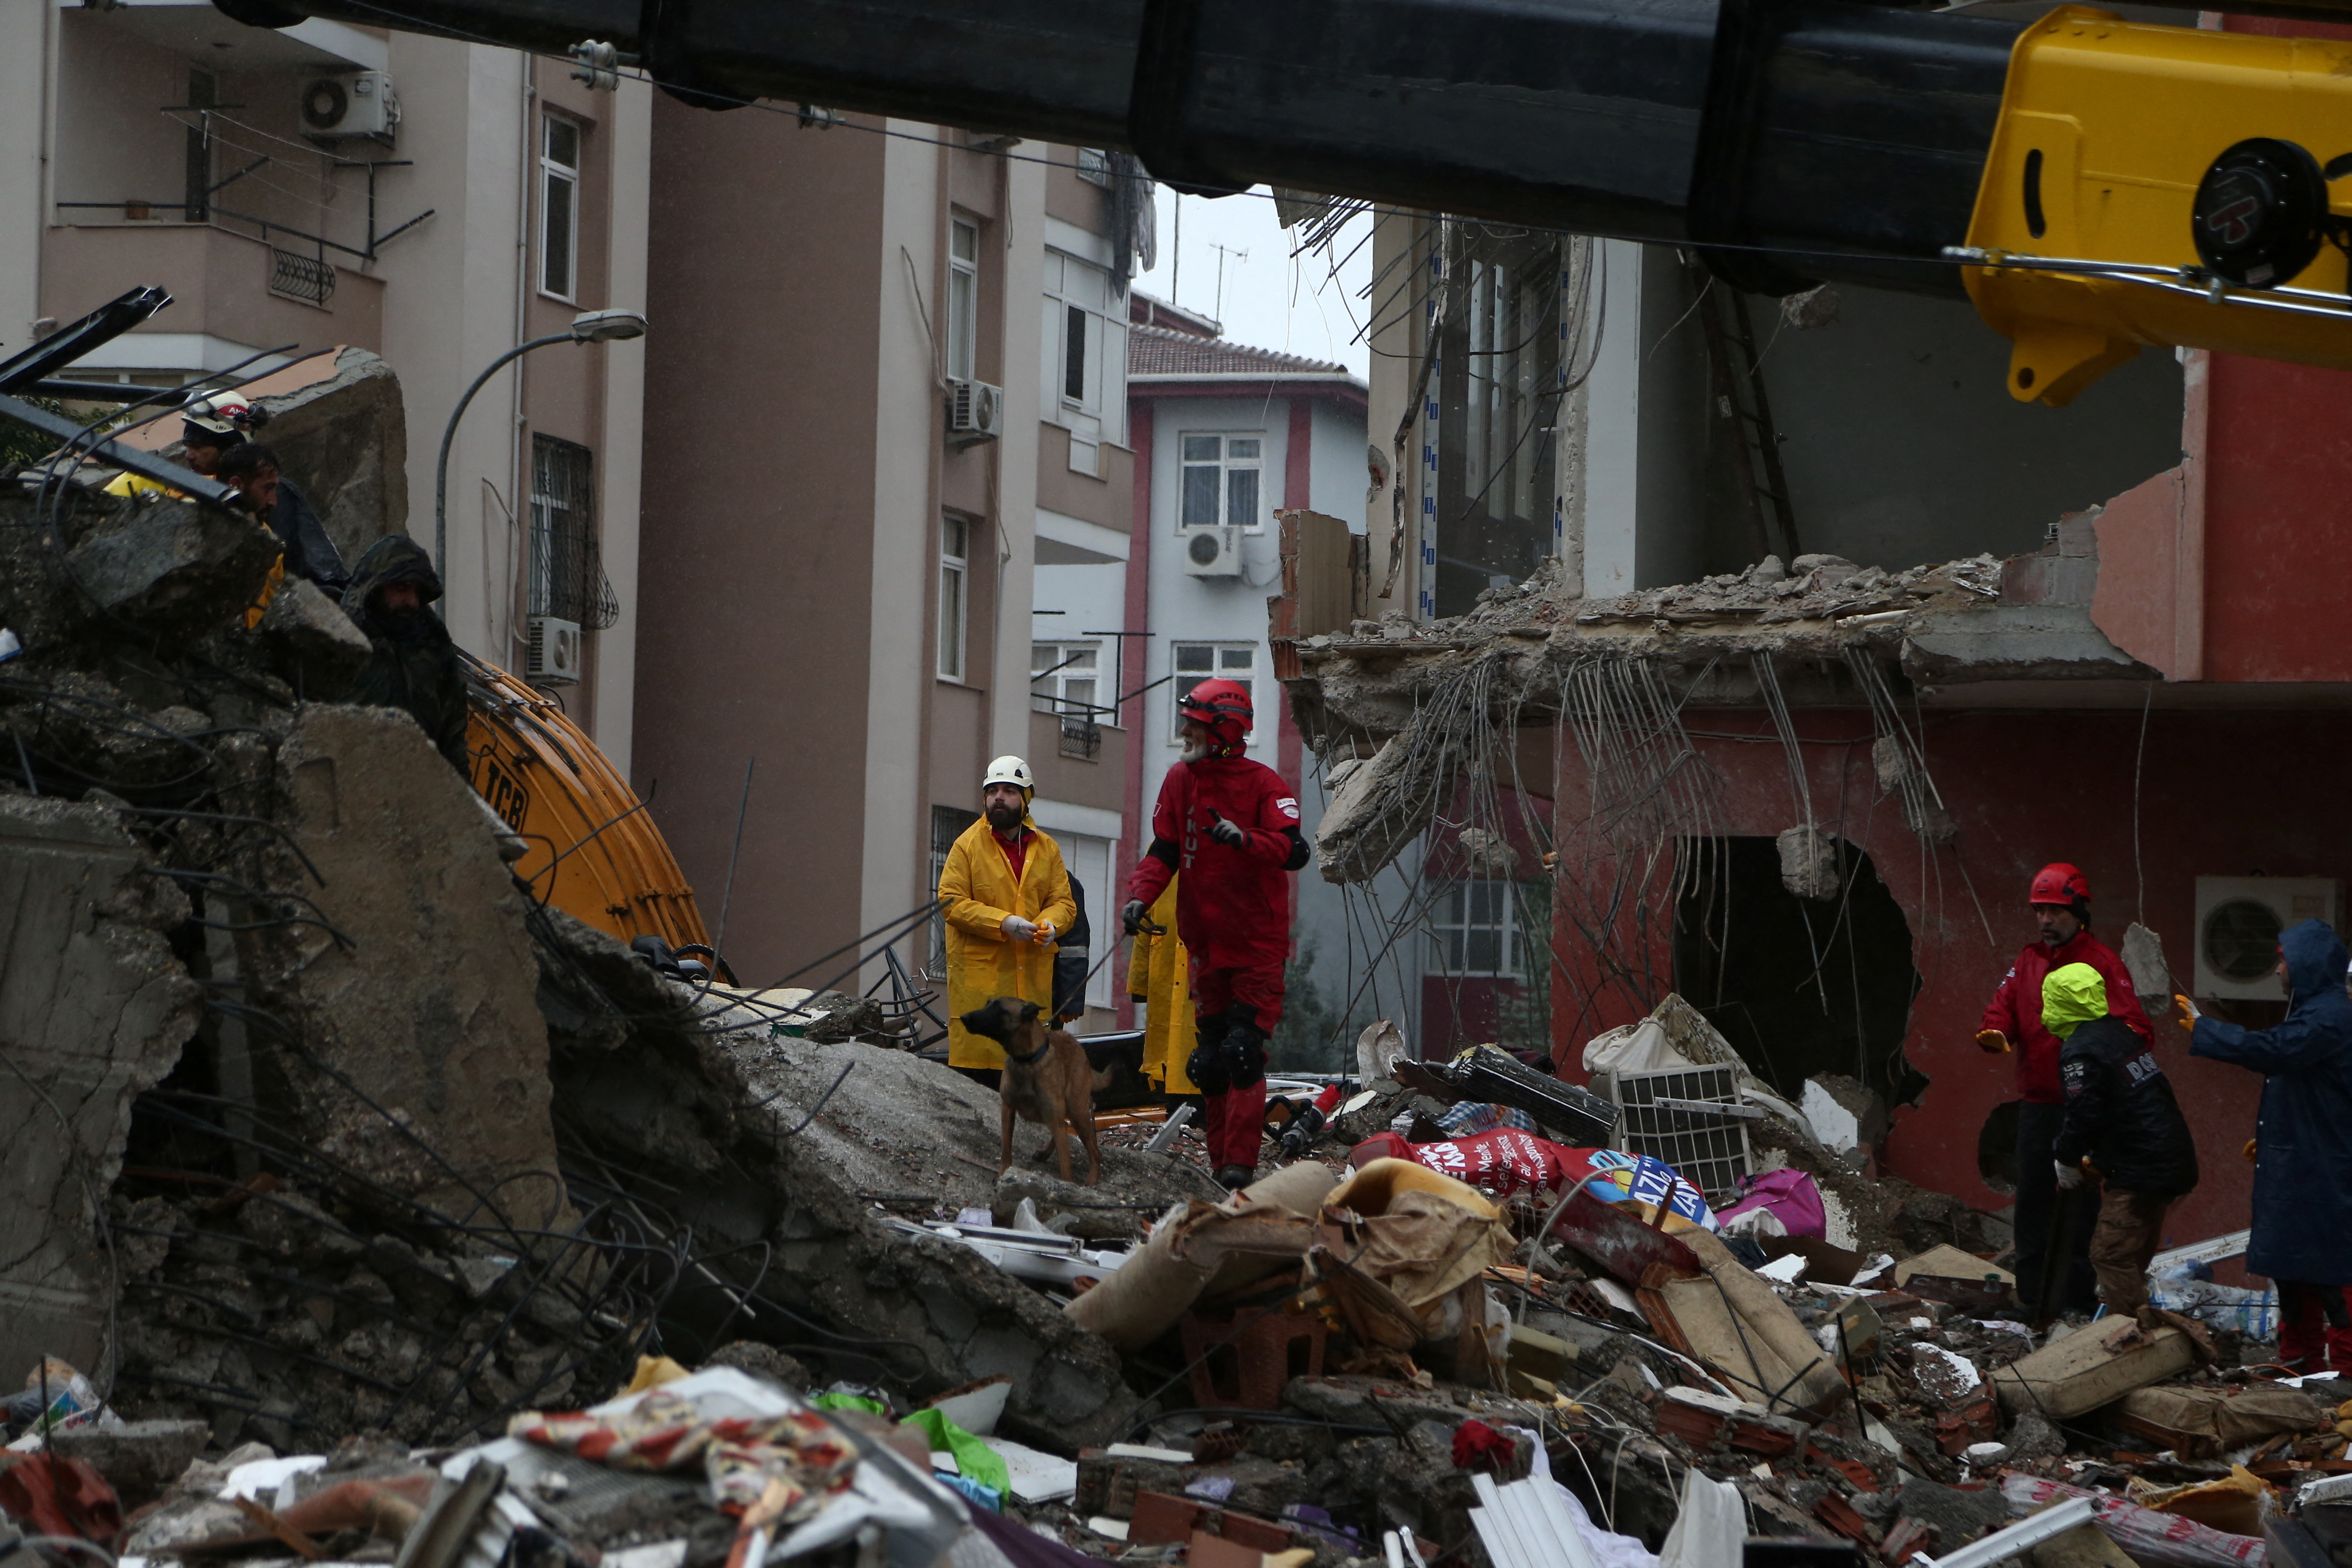 A member of the Turkish Search and Rescue Association with a sniffer dog searching for survivors at the site of a collapsed building following an earthquake in Adana, Turkey, on Feb 6, 2023. PHOTO: REUTERS